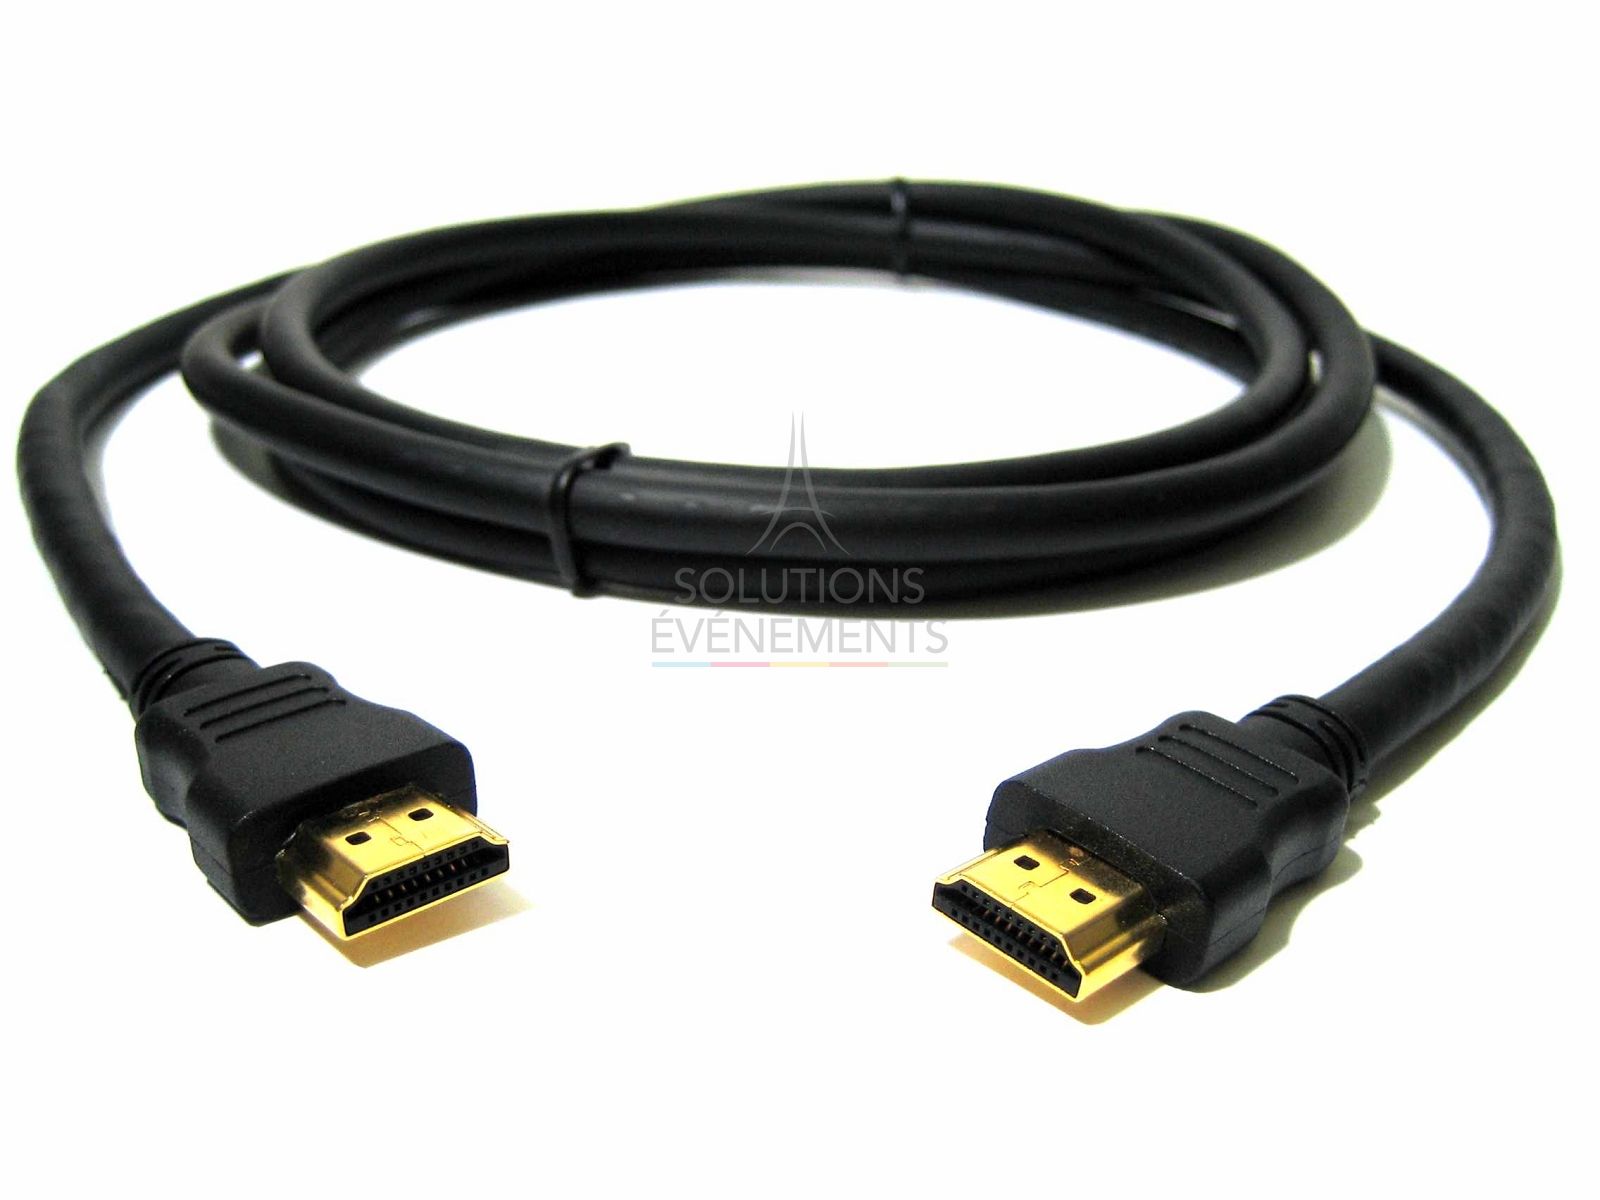 HDMI cable rental